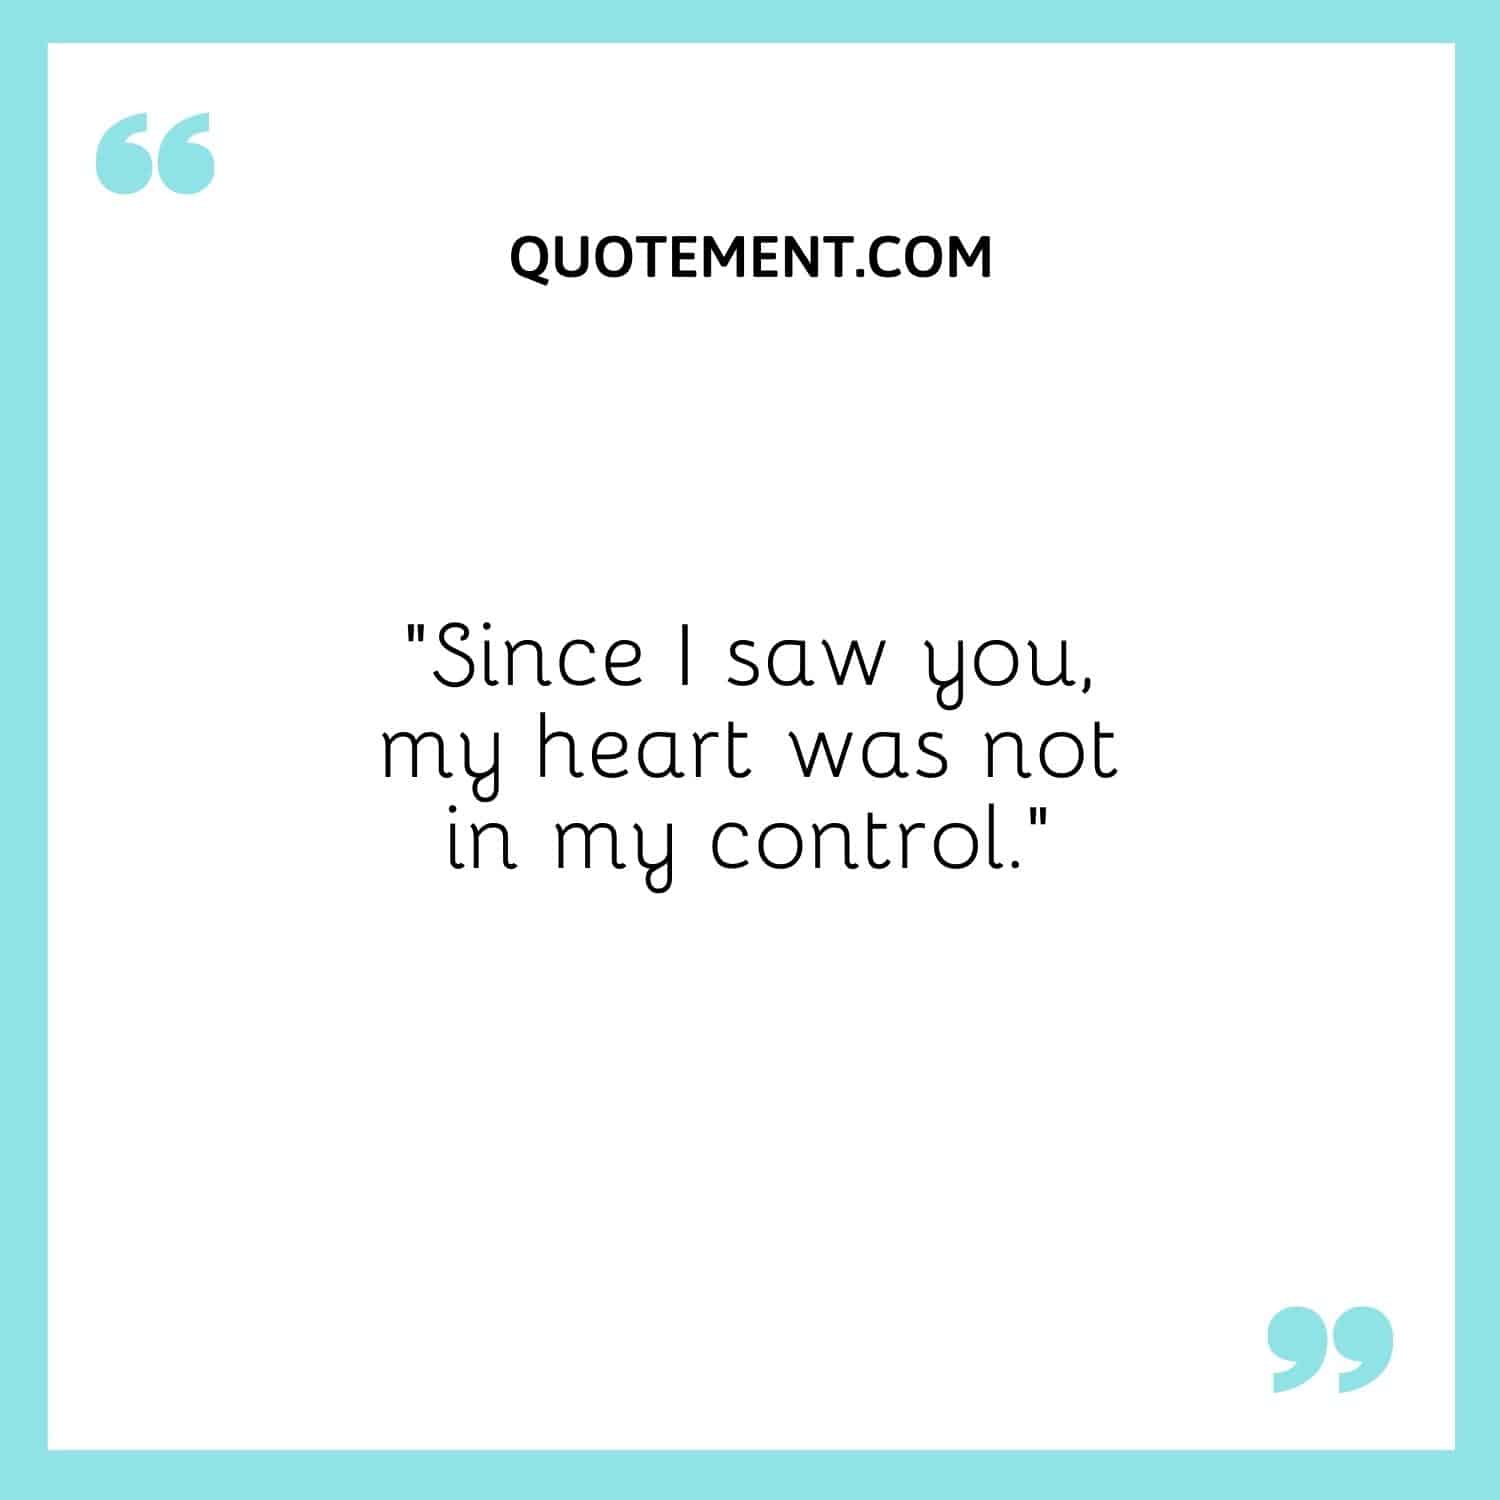 Since I saw you, my heart was not in my control